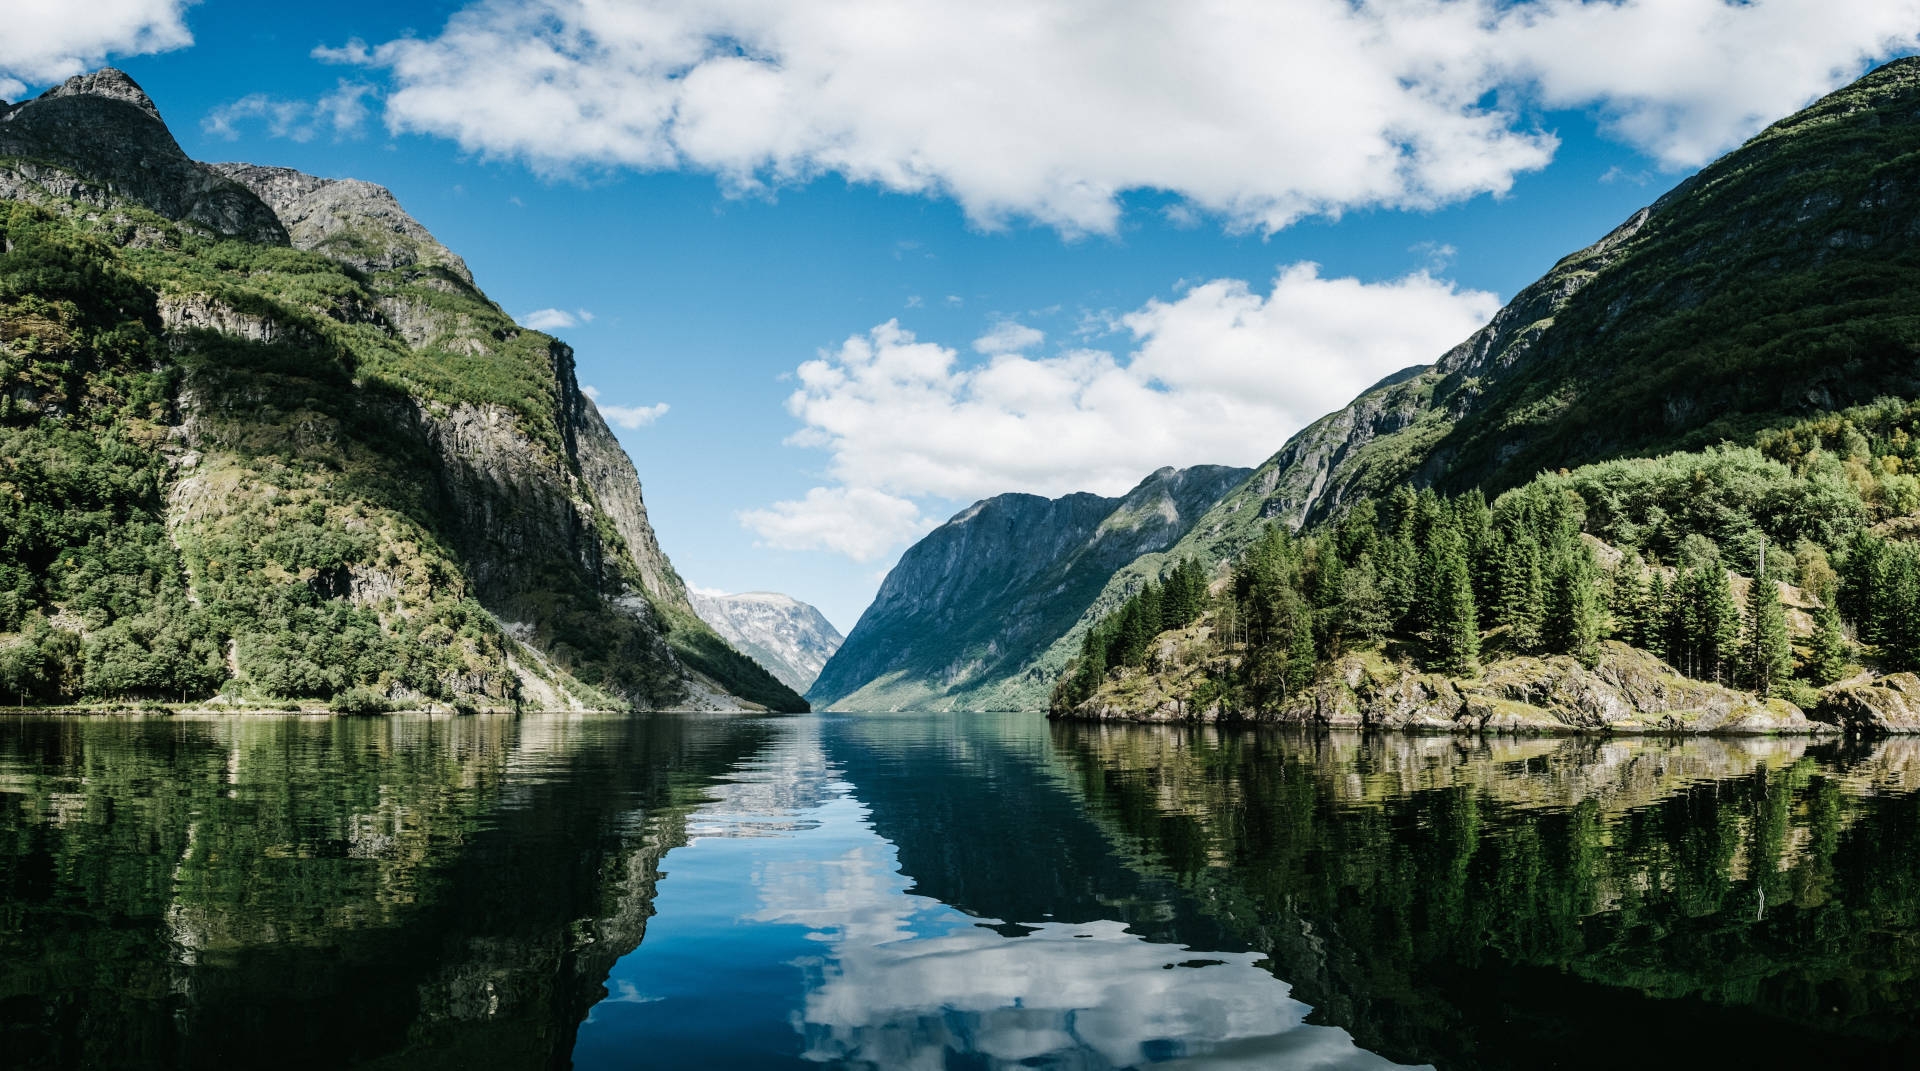 Explore Norway's dramatic fjords, majestic mountains and unspoiled coastline.